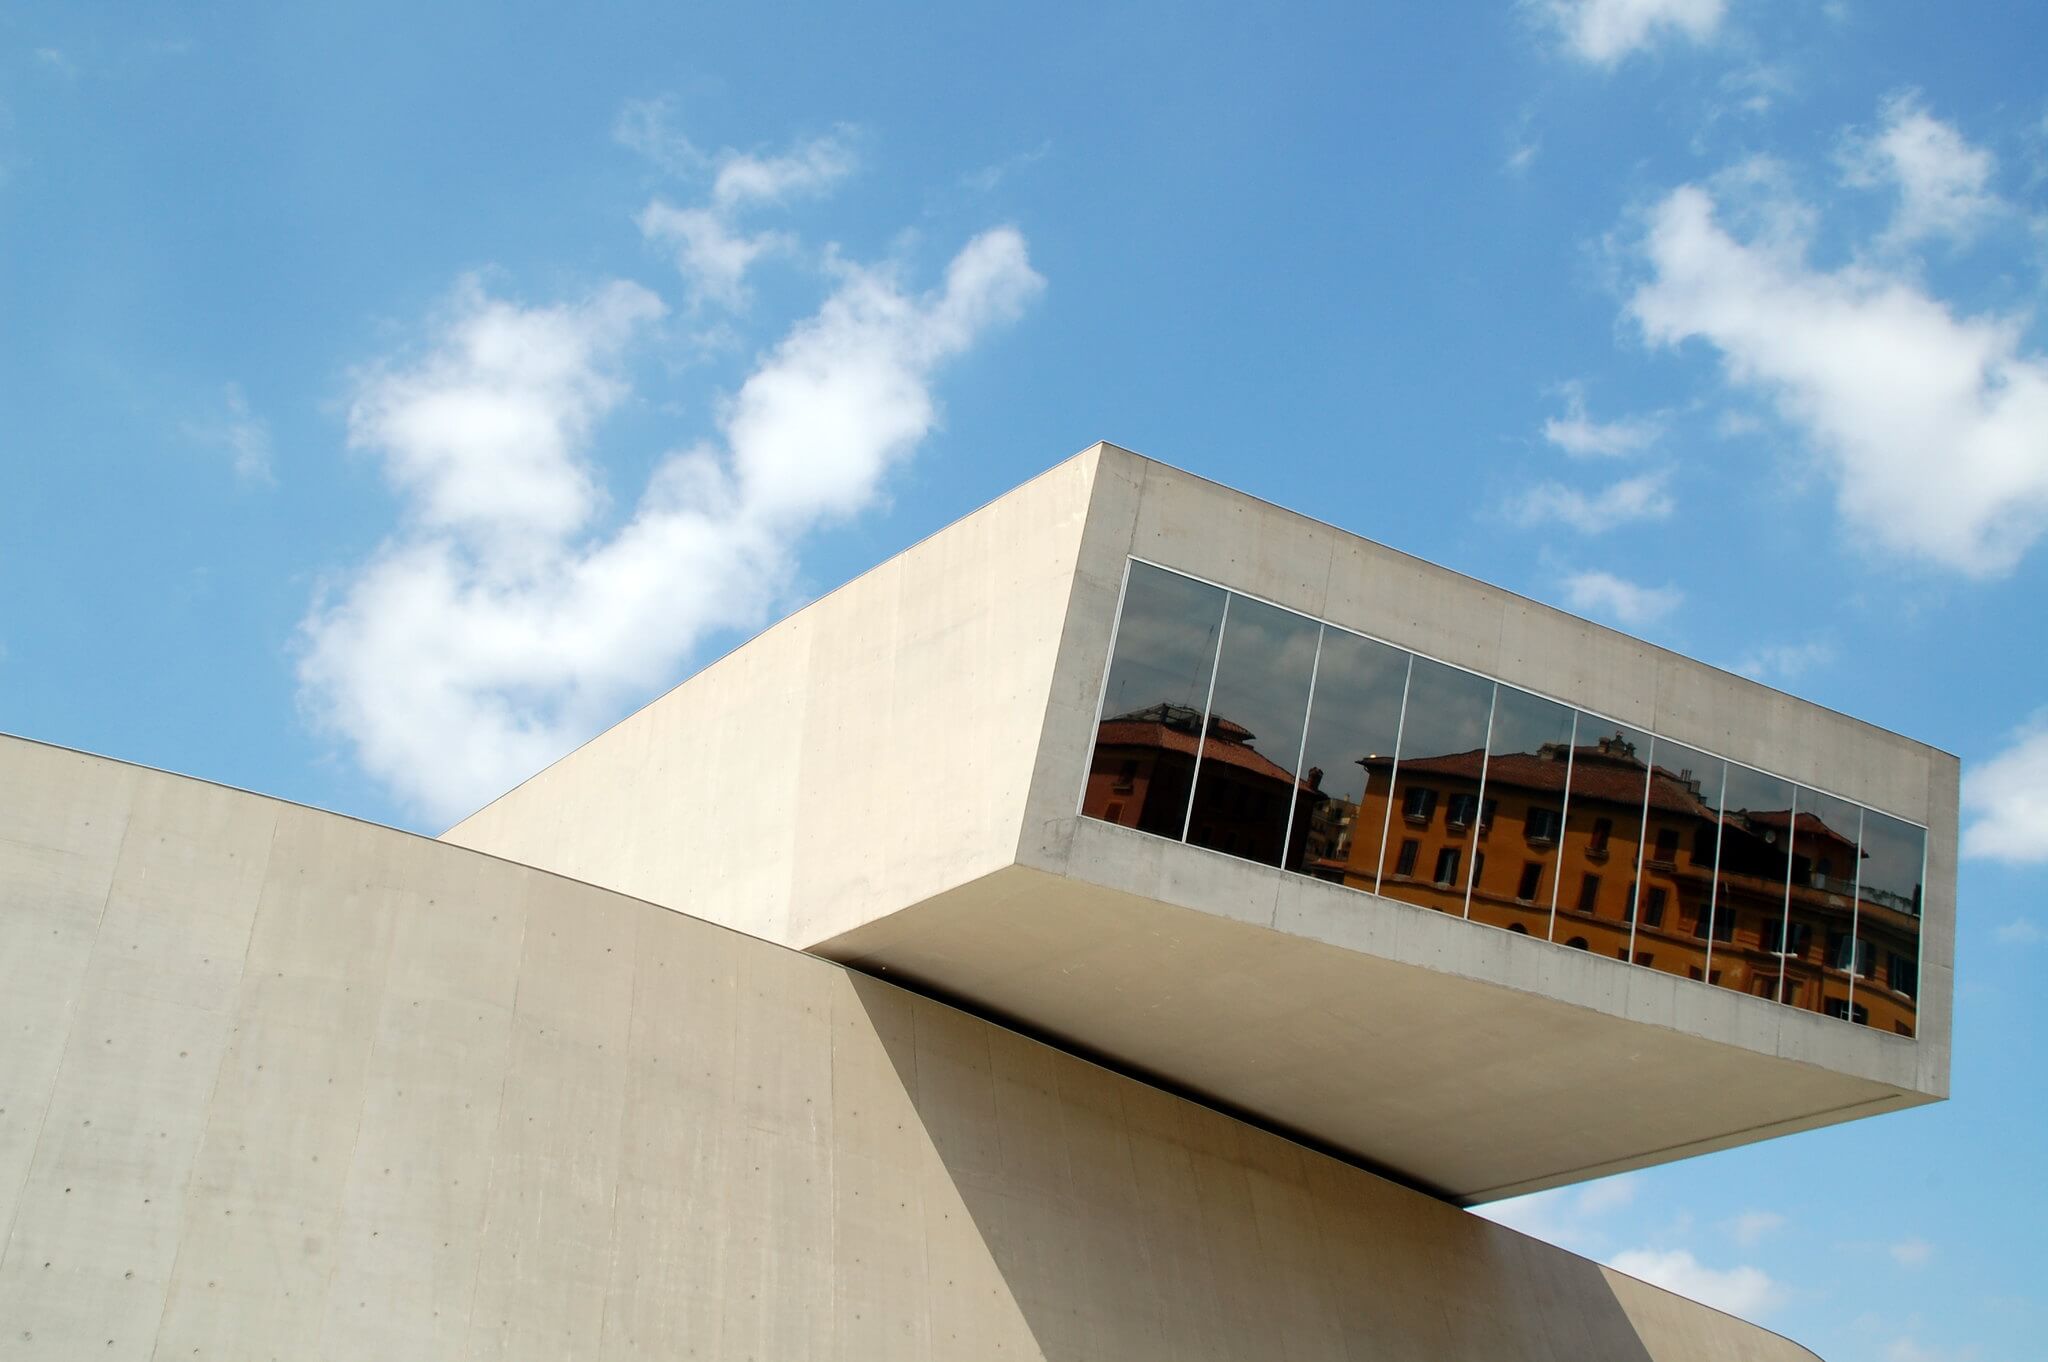 The ZHA-designed MAXXI museum launches an environmental upgrade competition